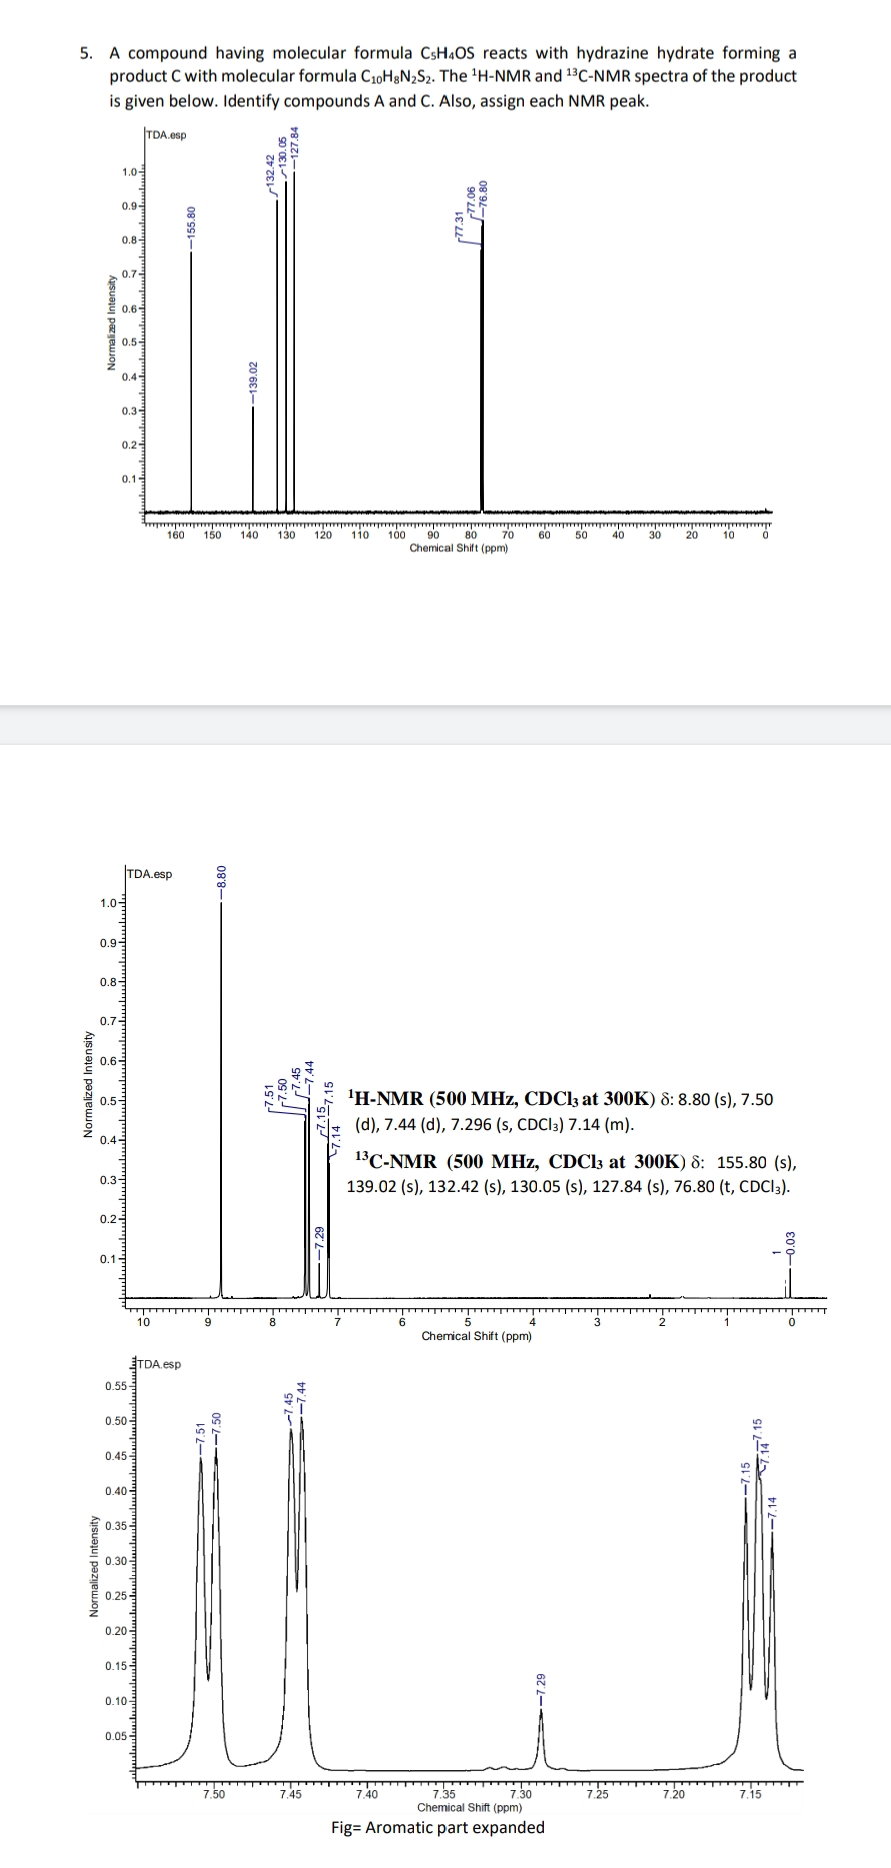 5. A compound having molecular formula CSHẠOS reacts with hydrazine hydrate forming a
product C with molecular formula C10H&N2S2. The 'H-NMR and 13C-NMR spectra of the product
is given below. Identify compounds A and C. Also, assign each NMR peak.
TDA.esp
1.0-
0.9-
0.8-
0.7-
E 0.6
9 0.5
0.4-
0.3
0.2
0.1-
160
150 140
110
70
Chemical Shift (ppm)
130
120
100
90
80
60
50
40
30
20
10
TDA.esp
1.0-
0.9-
0.8-
0.7-
0.6-
'H-NMR (500 MHz, CDC33 at 300K) 8: 8.80 (s), 7.50
0.5-
(d), 7.44 (d), 7.296 (s, CDCI3) 7.14 (m).
0.4-
13C-NMR (500 MHz, CDC13 at 300K) 8: 155.80 (s),
0.3-
139.02 (s), 132.42 (s), 130.05 (s), 127.84 (s), 76.80 (t, CDCI3).
0.2-
0.1-
10
8
6.
Chemical Shift (ppm)
ETDA.esp
0.55-
0.50-
0.45-
0.40-
0.35-
0.30-
0.25-
0.20-
0.15
0.10-
0.05-
7.35
Chemical Shift (ppm)
7.50
7.45
7.40
7.30
7.25
7.20
7.15
Fig= Aromatic part expanded
Normalized Intensity
Normalized Intensity
Normalized Intensity
-7.50
